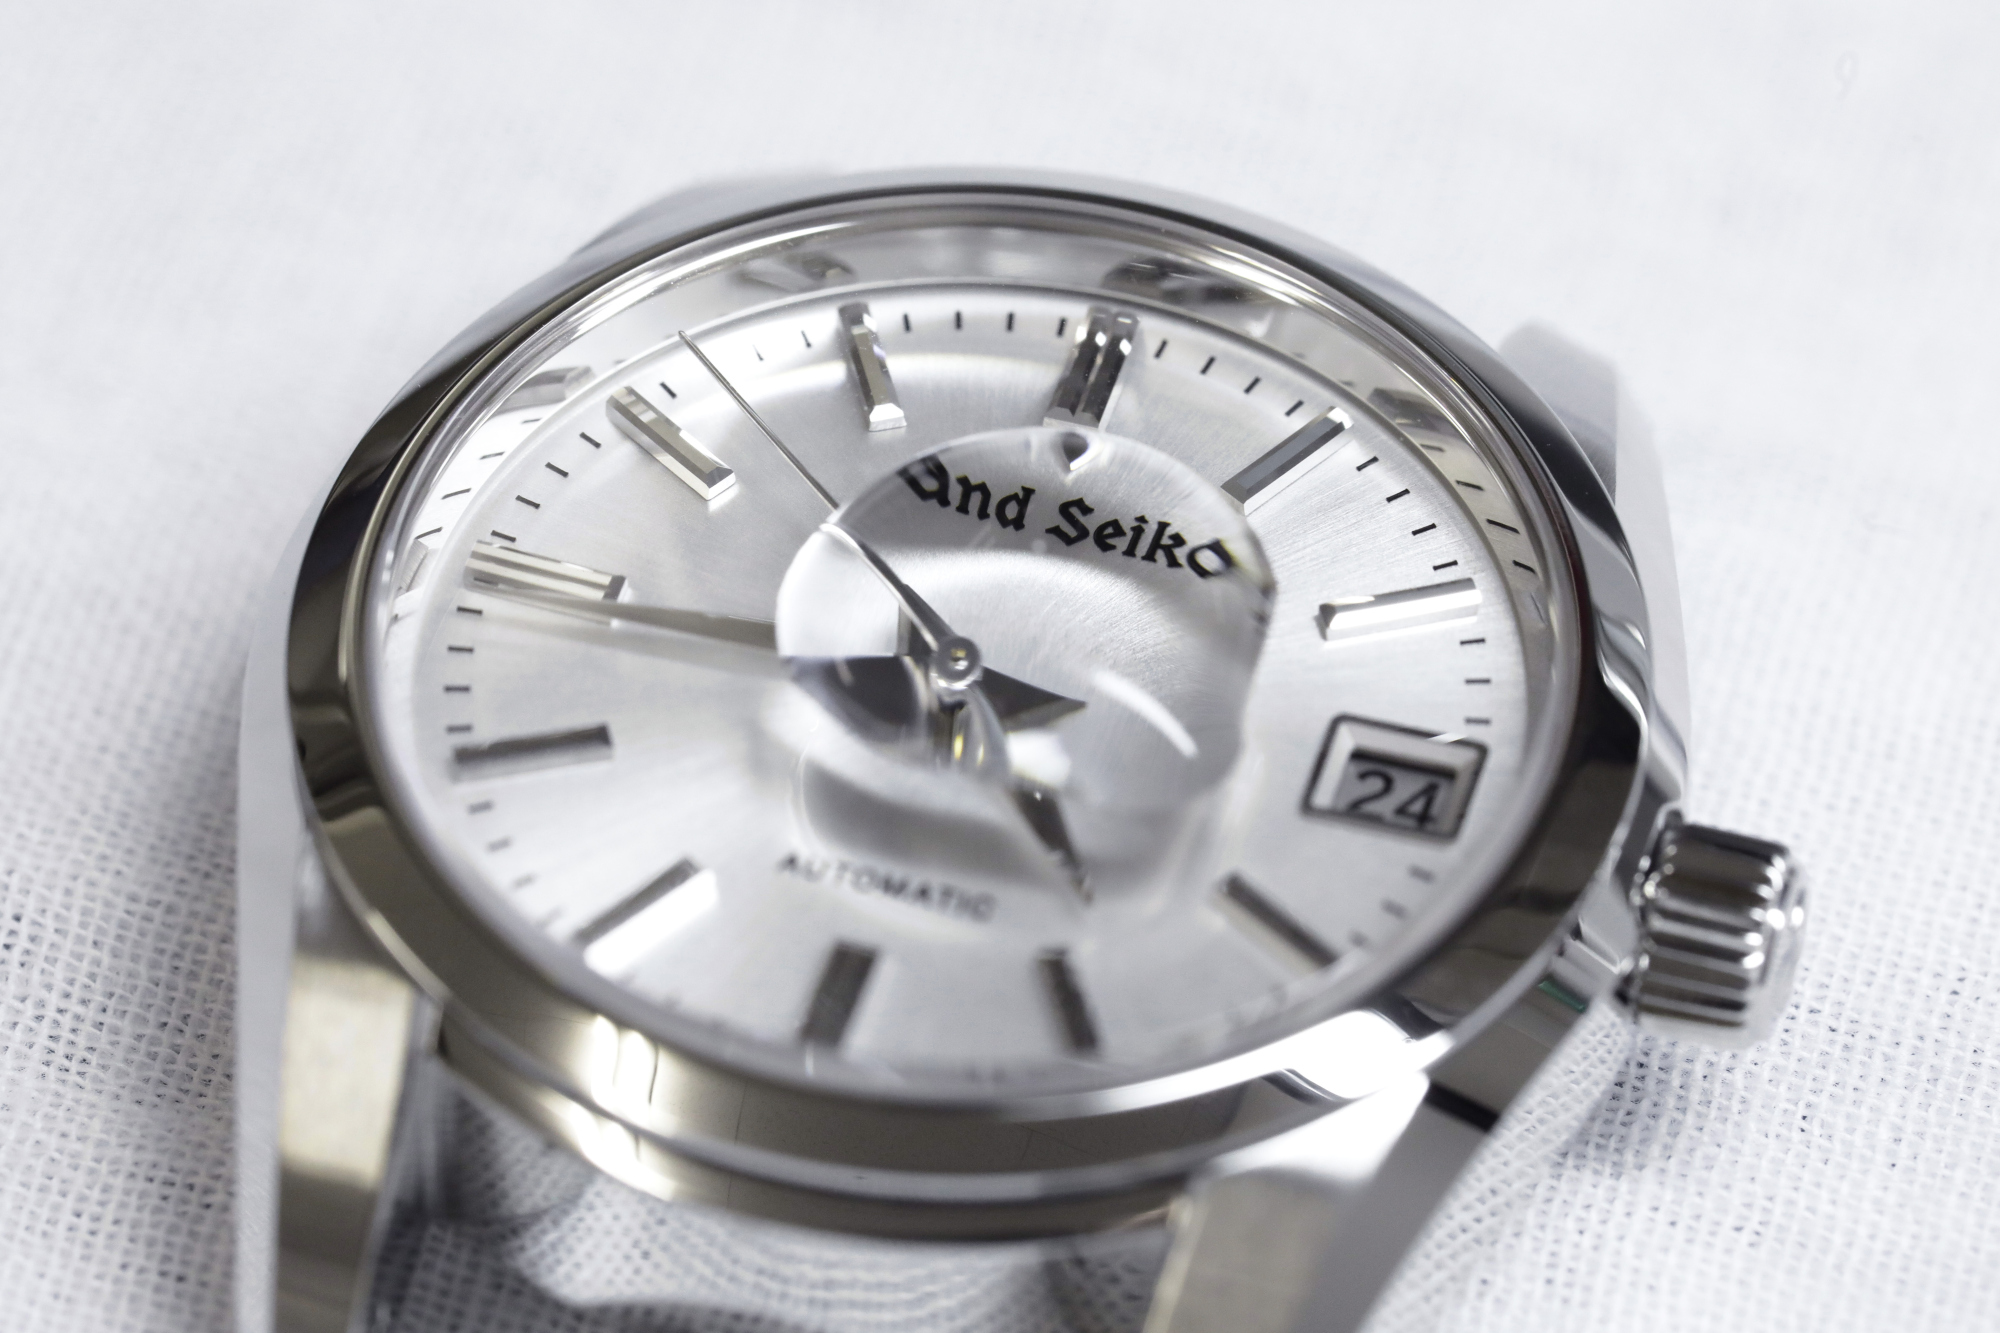 Japan's Seiko Launches New Luxury Watch Company - Bloomberg